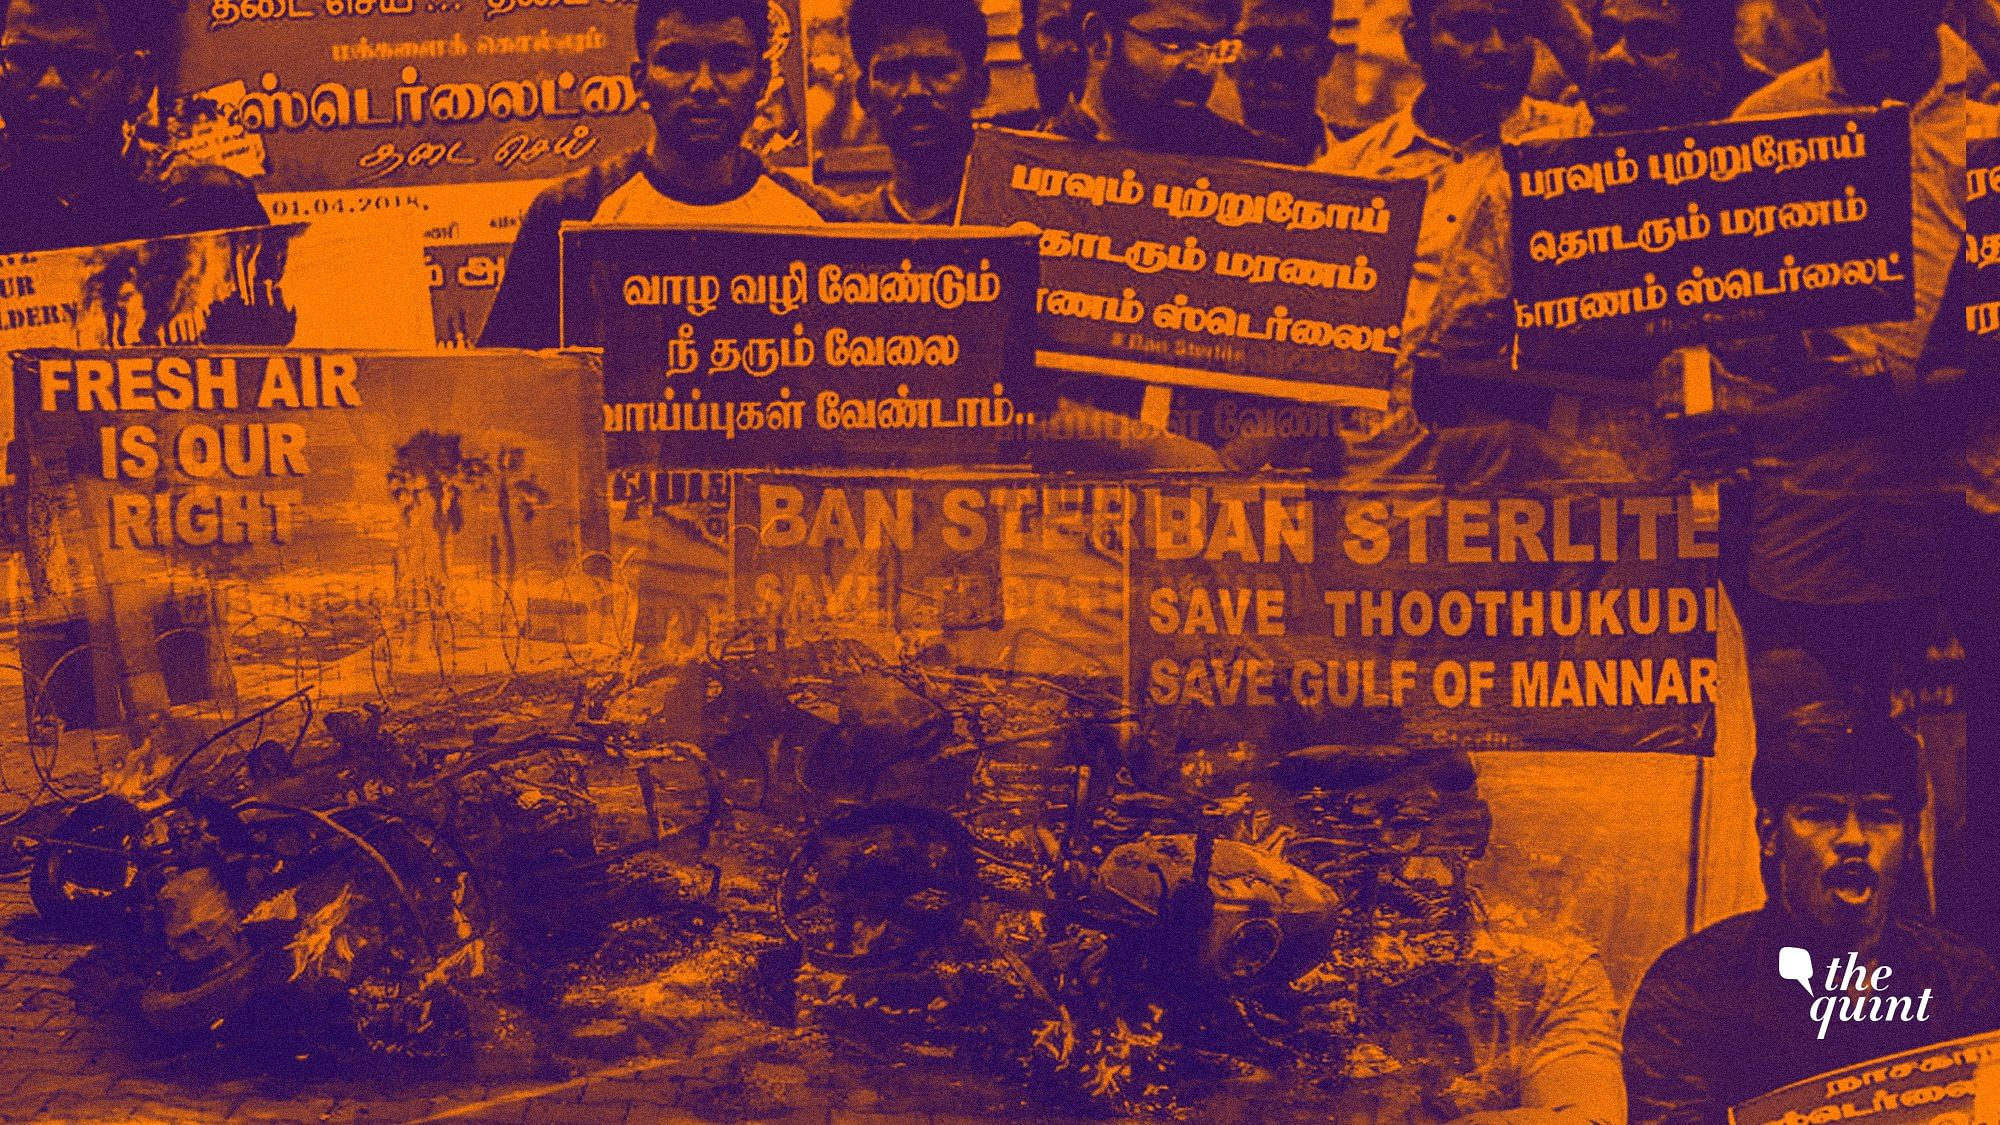 On 25 May, two days after the move, the Madurai Bench of the Madras High Court slammed the rationale of the state government in imposing an internet shutdown in not just Tuticorin but also in the neighbouring districts of Tirunelveli and Kanyakumari.